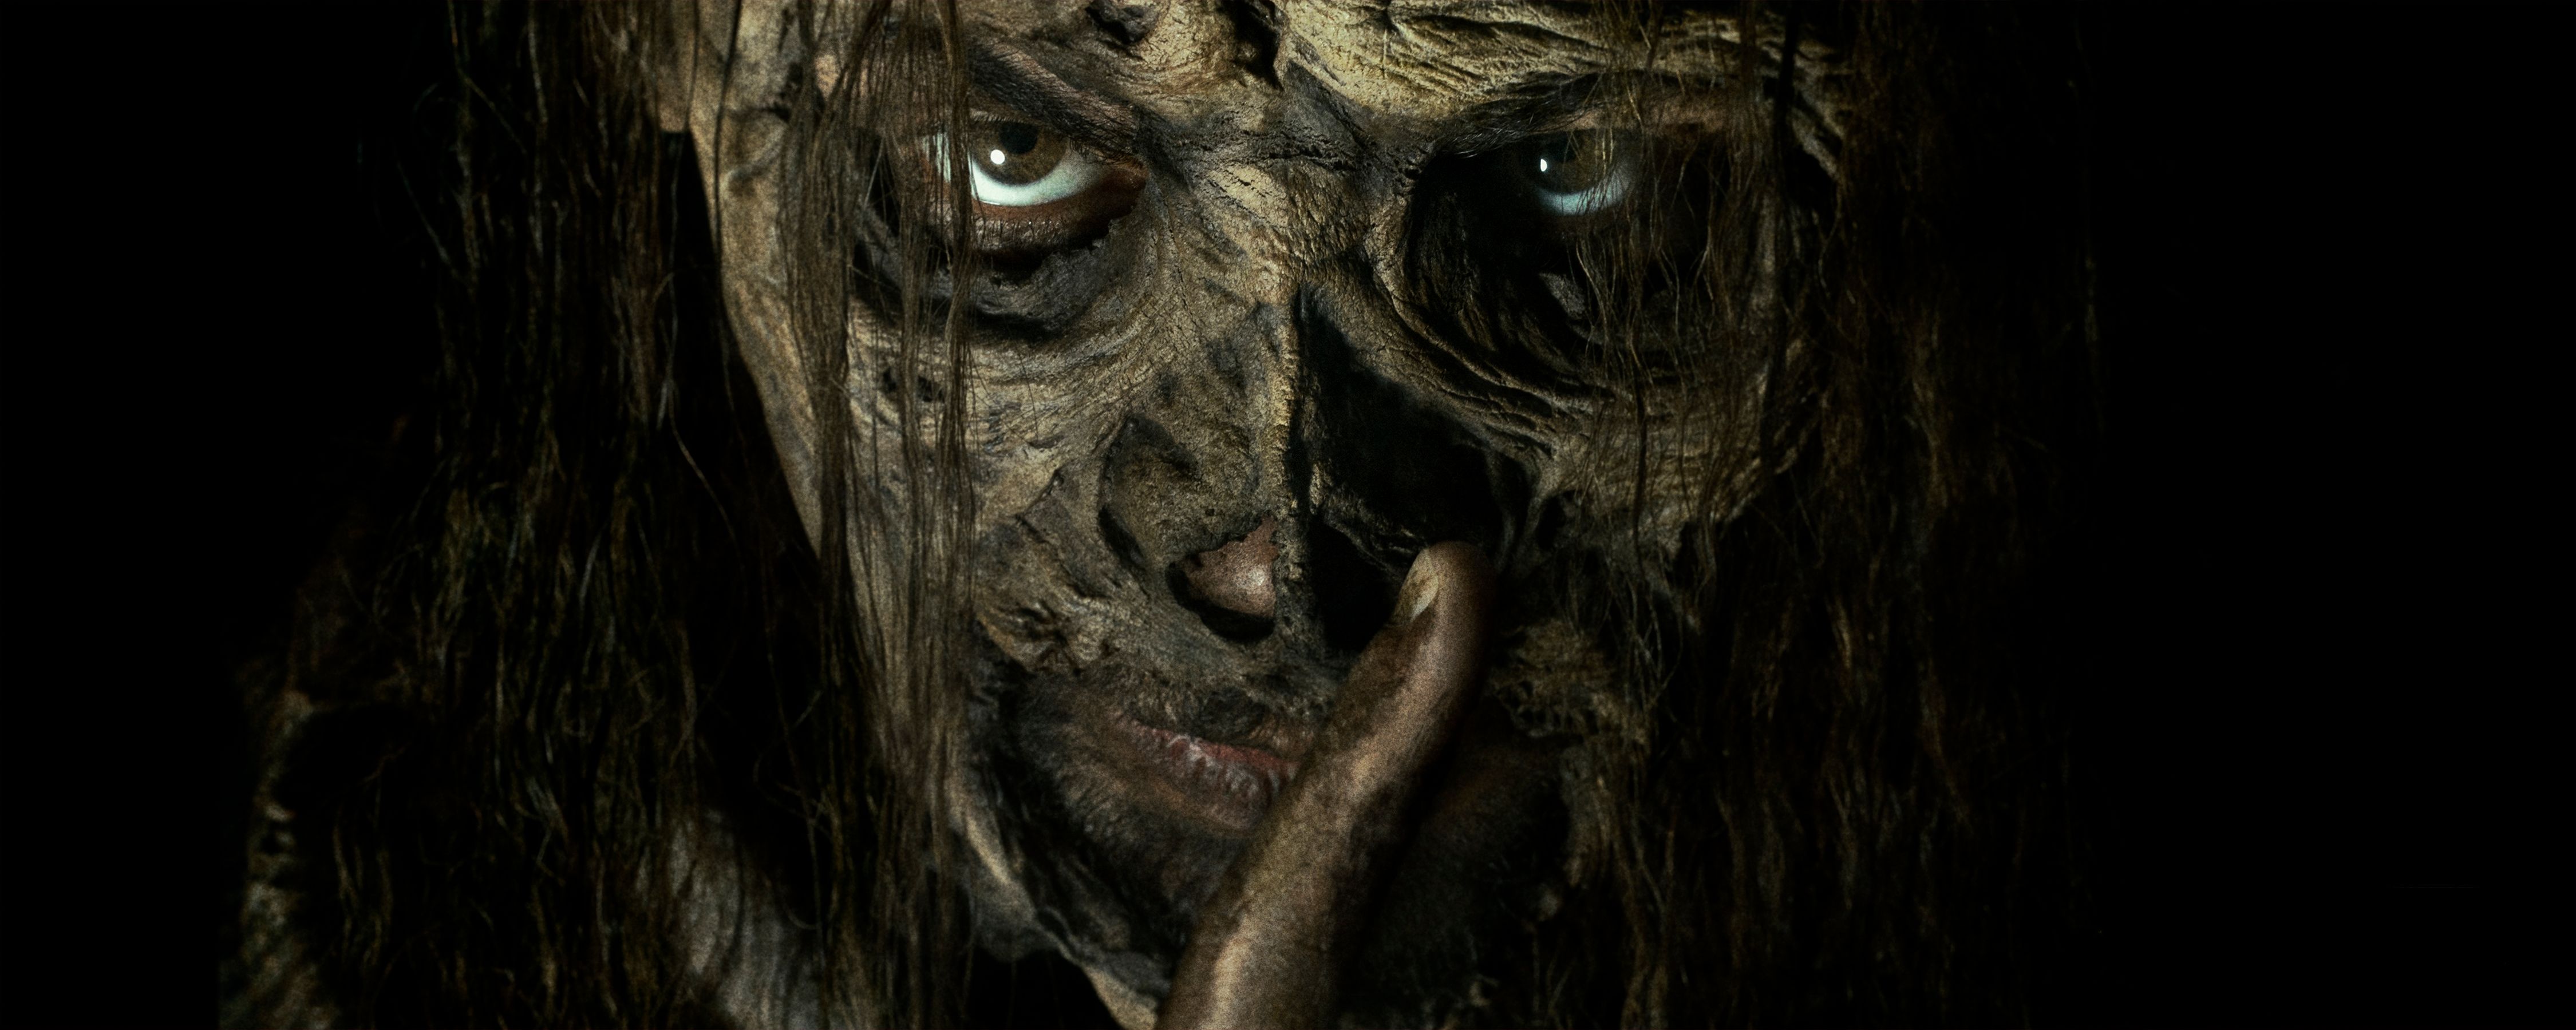 Best The Whisperers (Walking Dead) phone Wallpapers